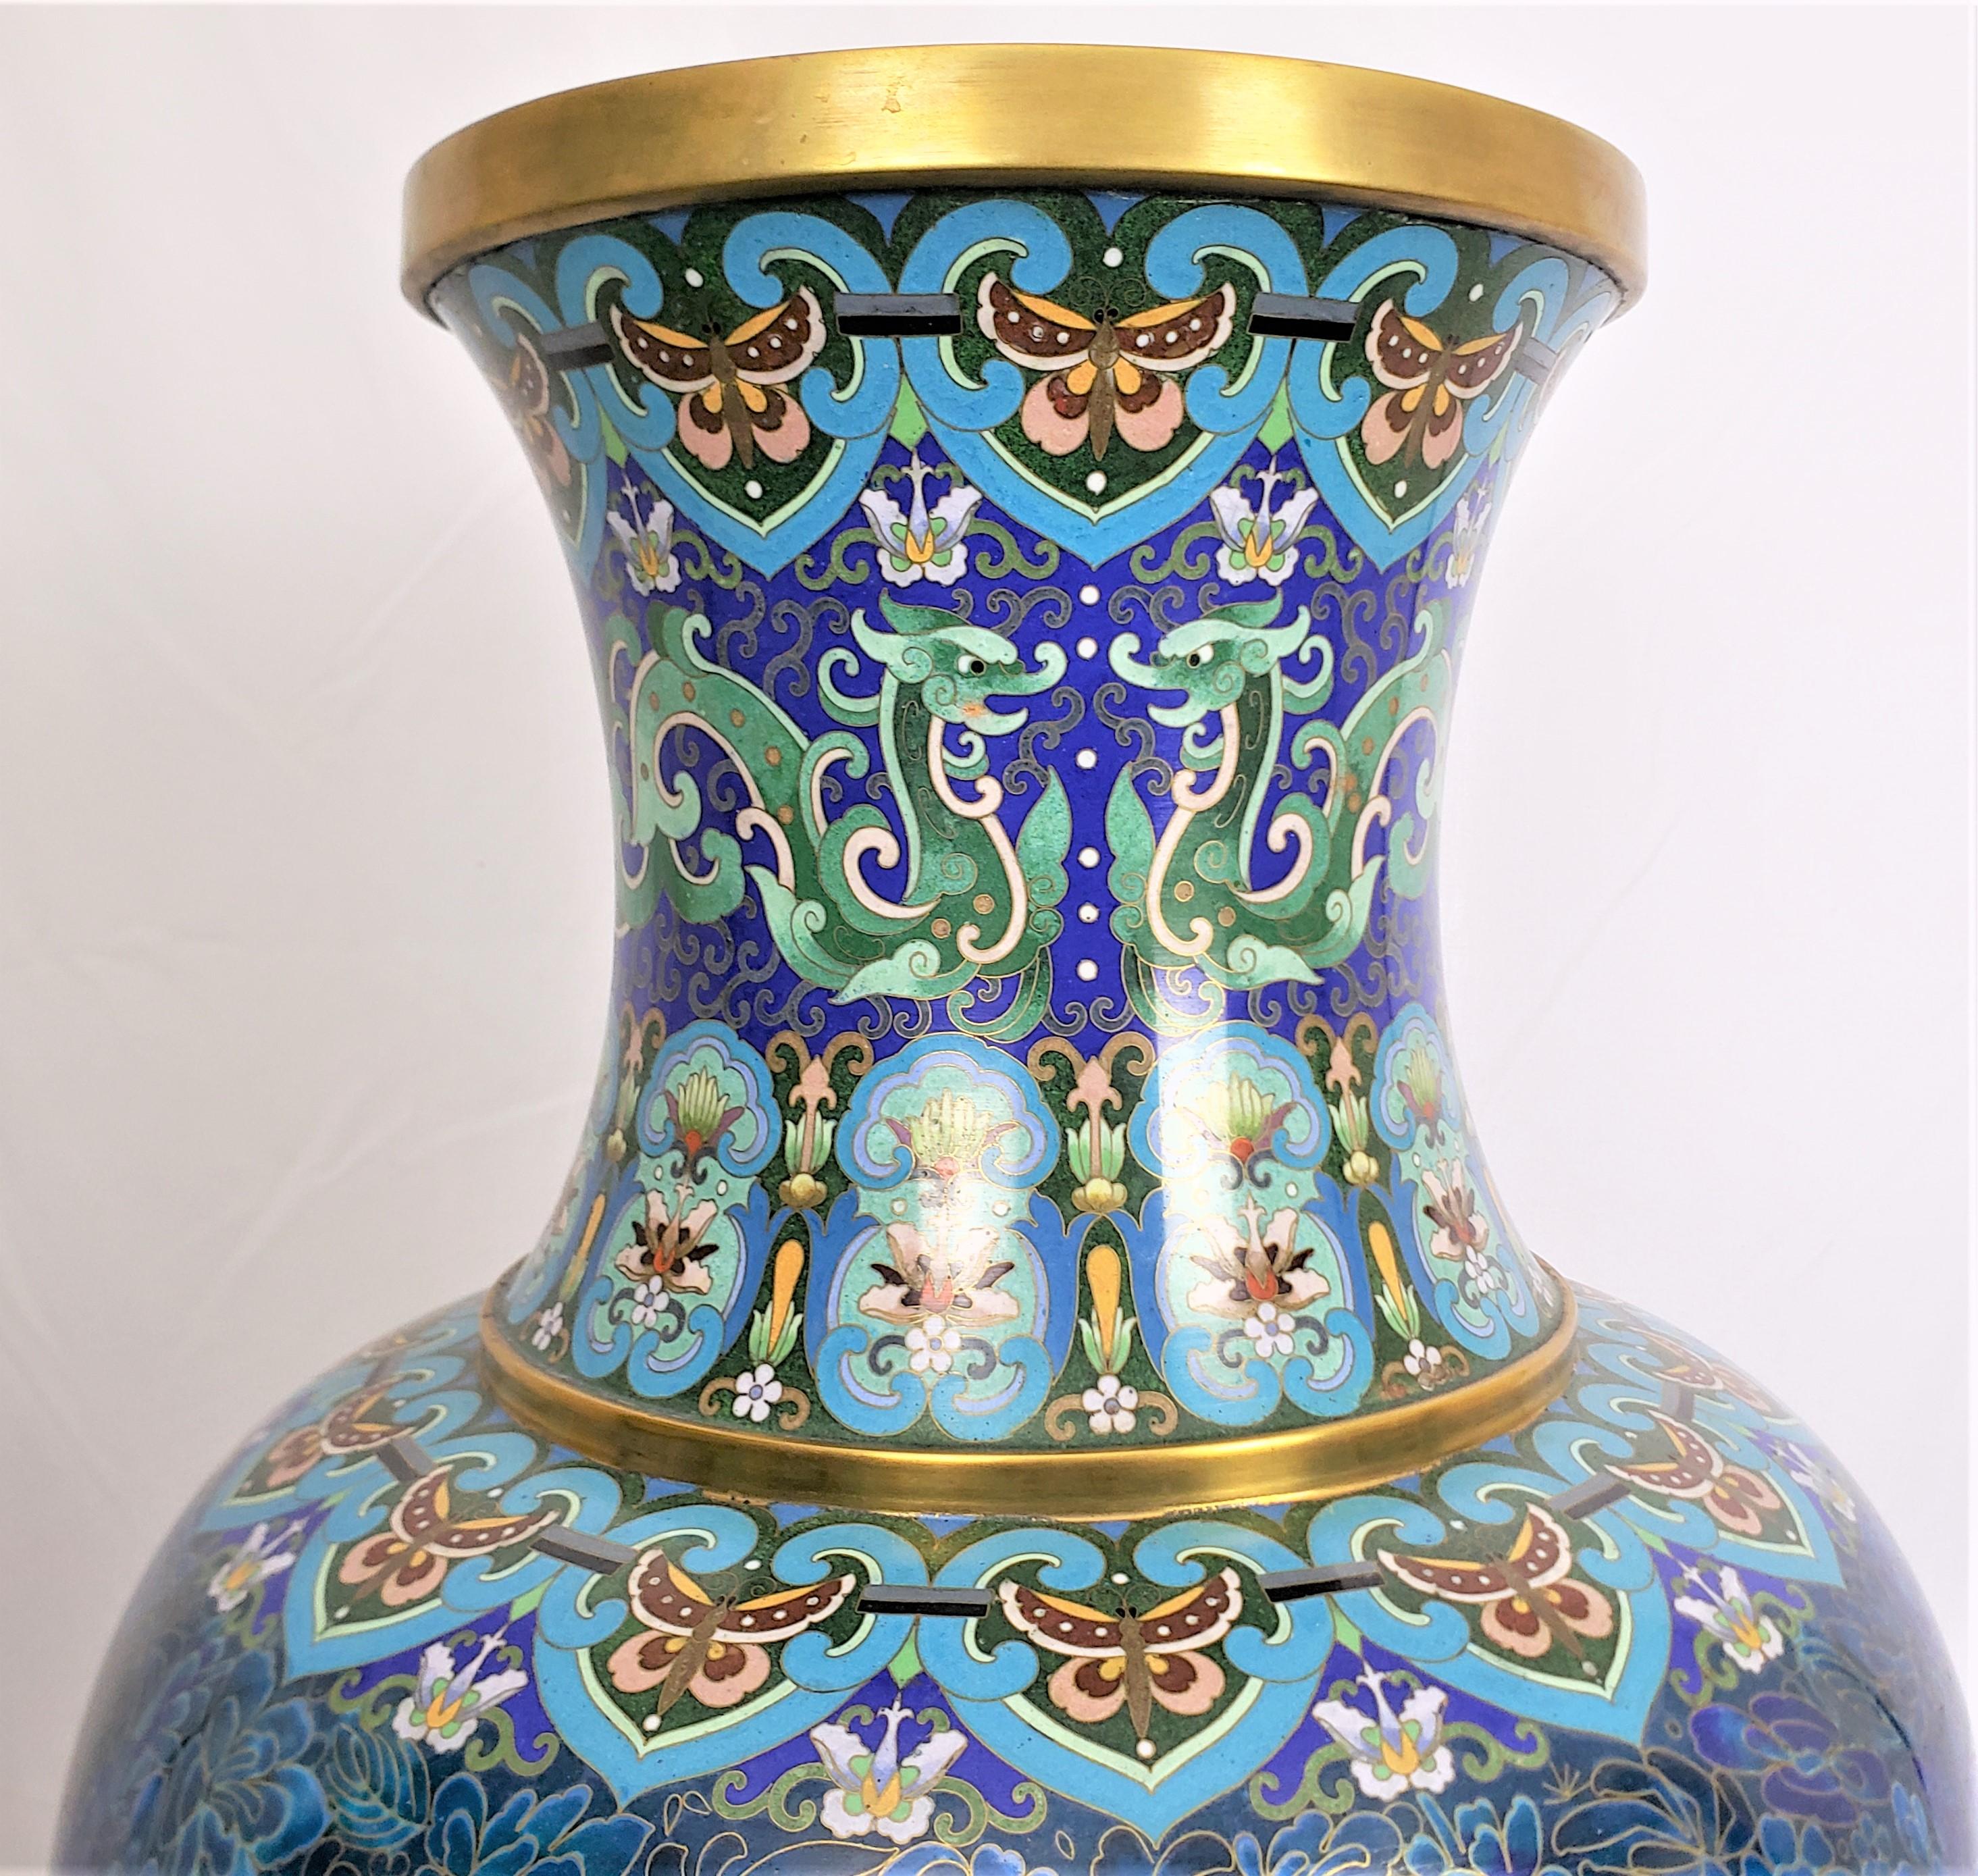 Huge Mid 20th Century Chinese Cloisonne Vase with Ornate Floral Decoration 2